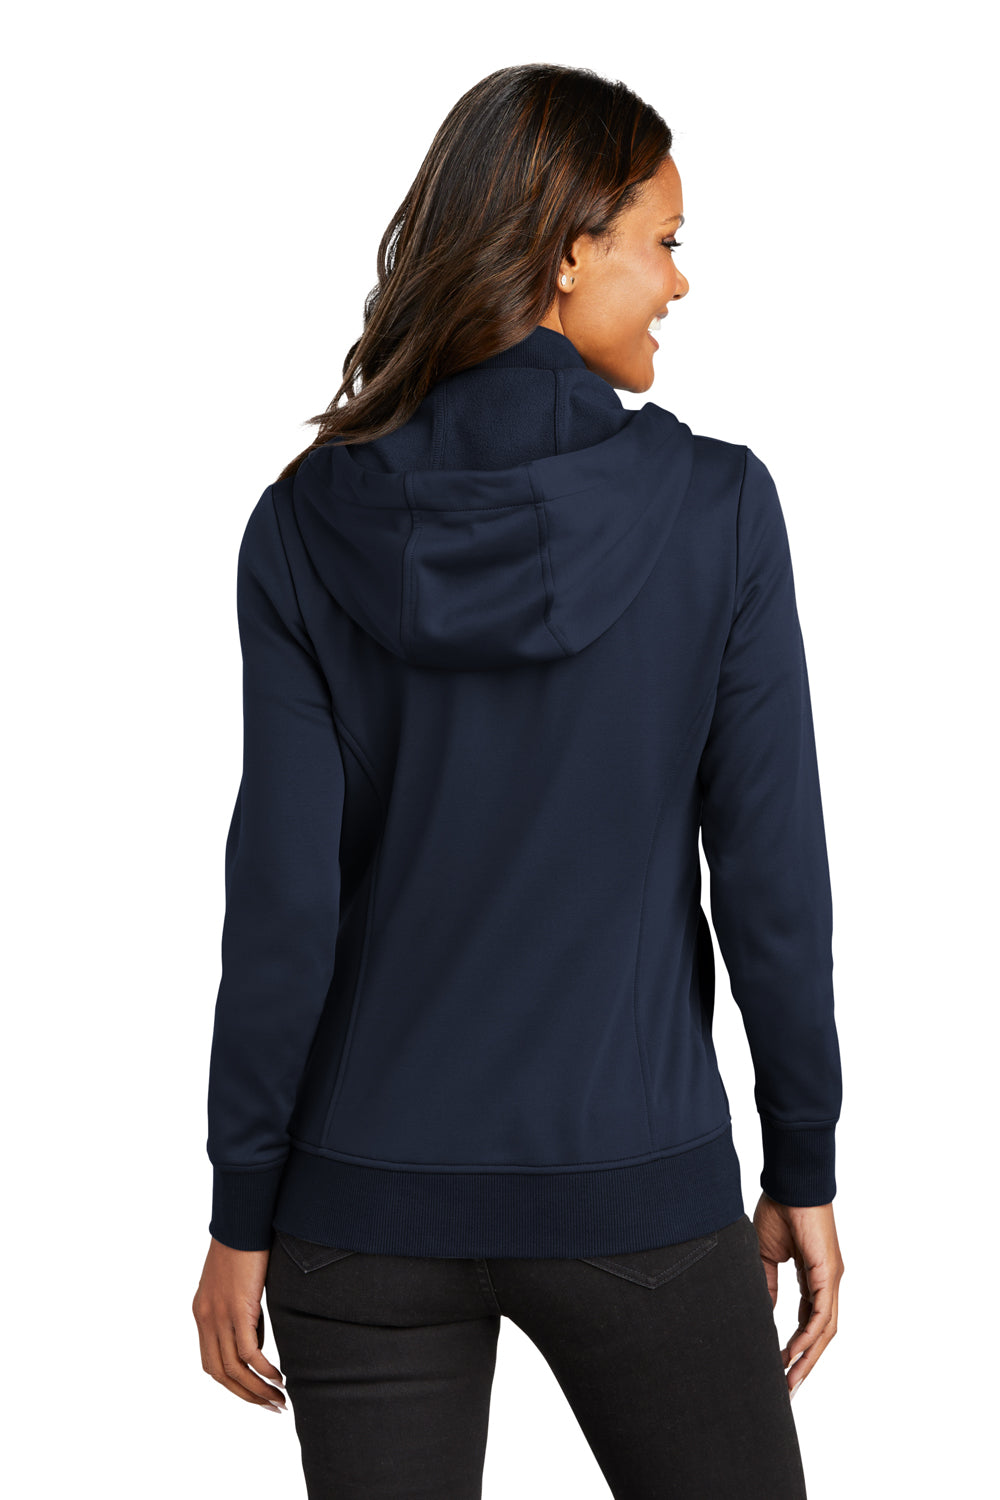 Port Authority L814 Womens Smooth Fleece Full Zip Hooded Jacket River Navy Blue Back